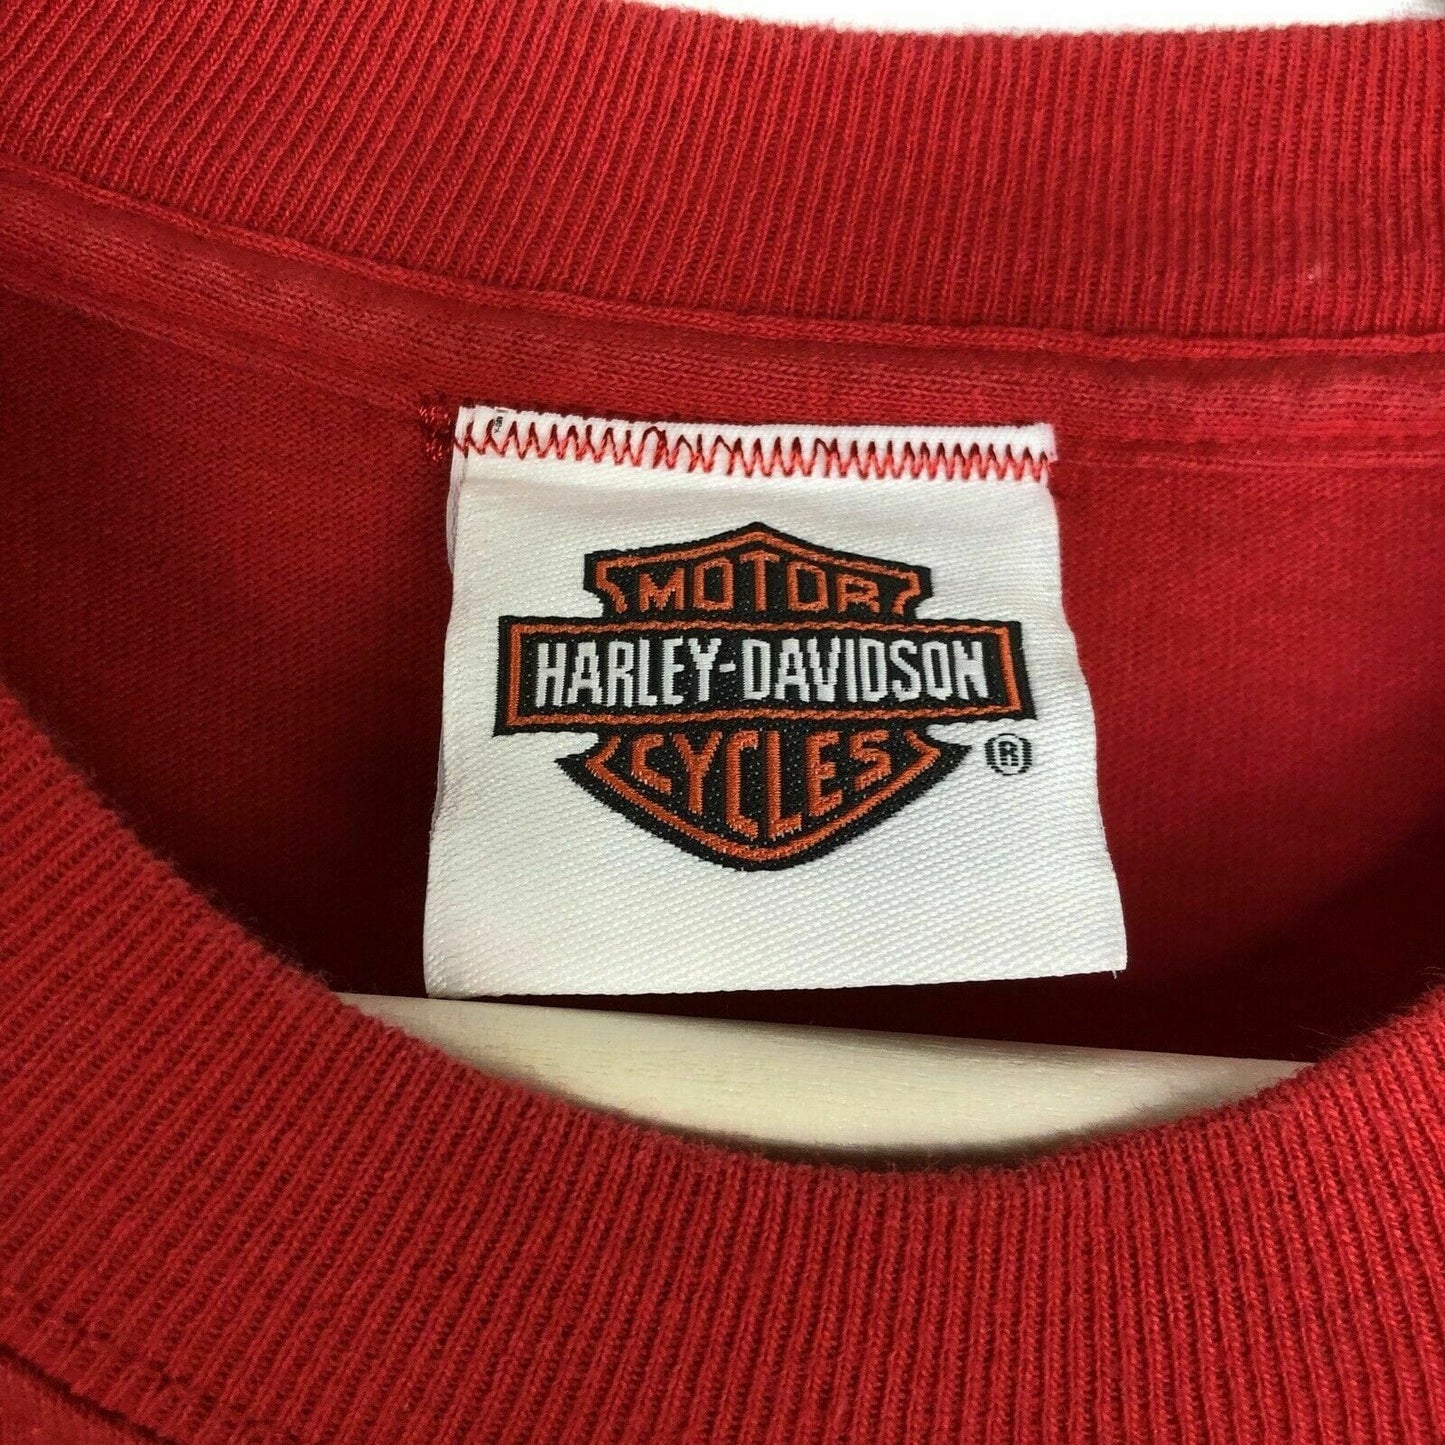 Exciting Harley-Davidson Mens T-Shirt Adventure Red S Very Good